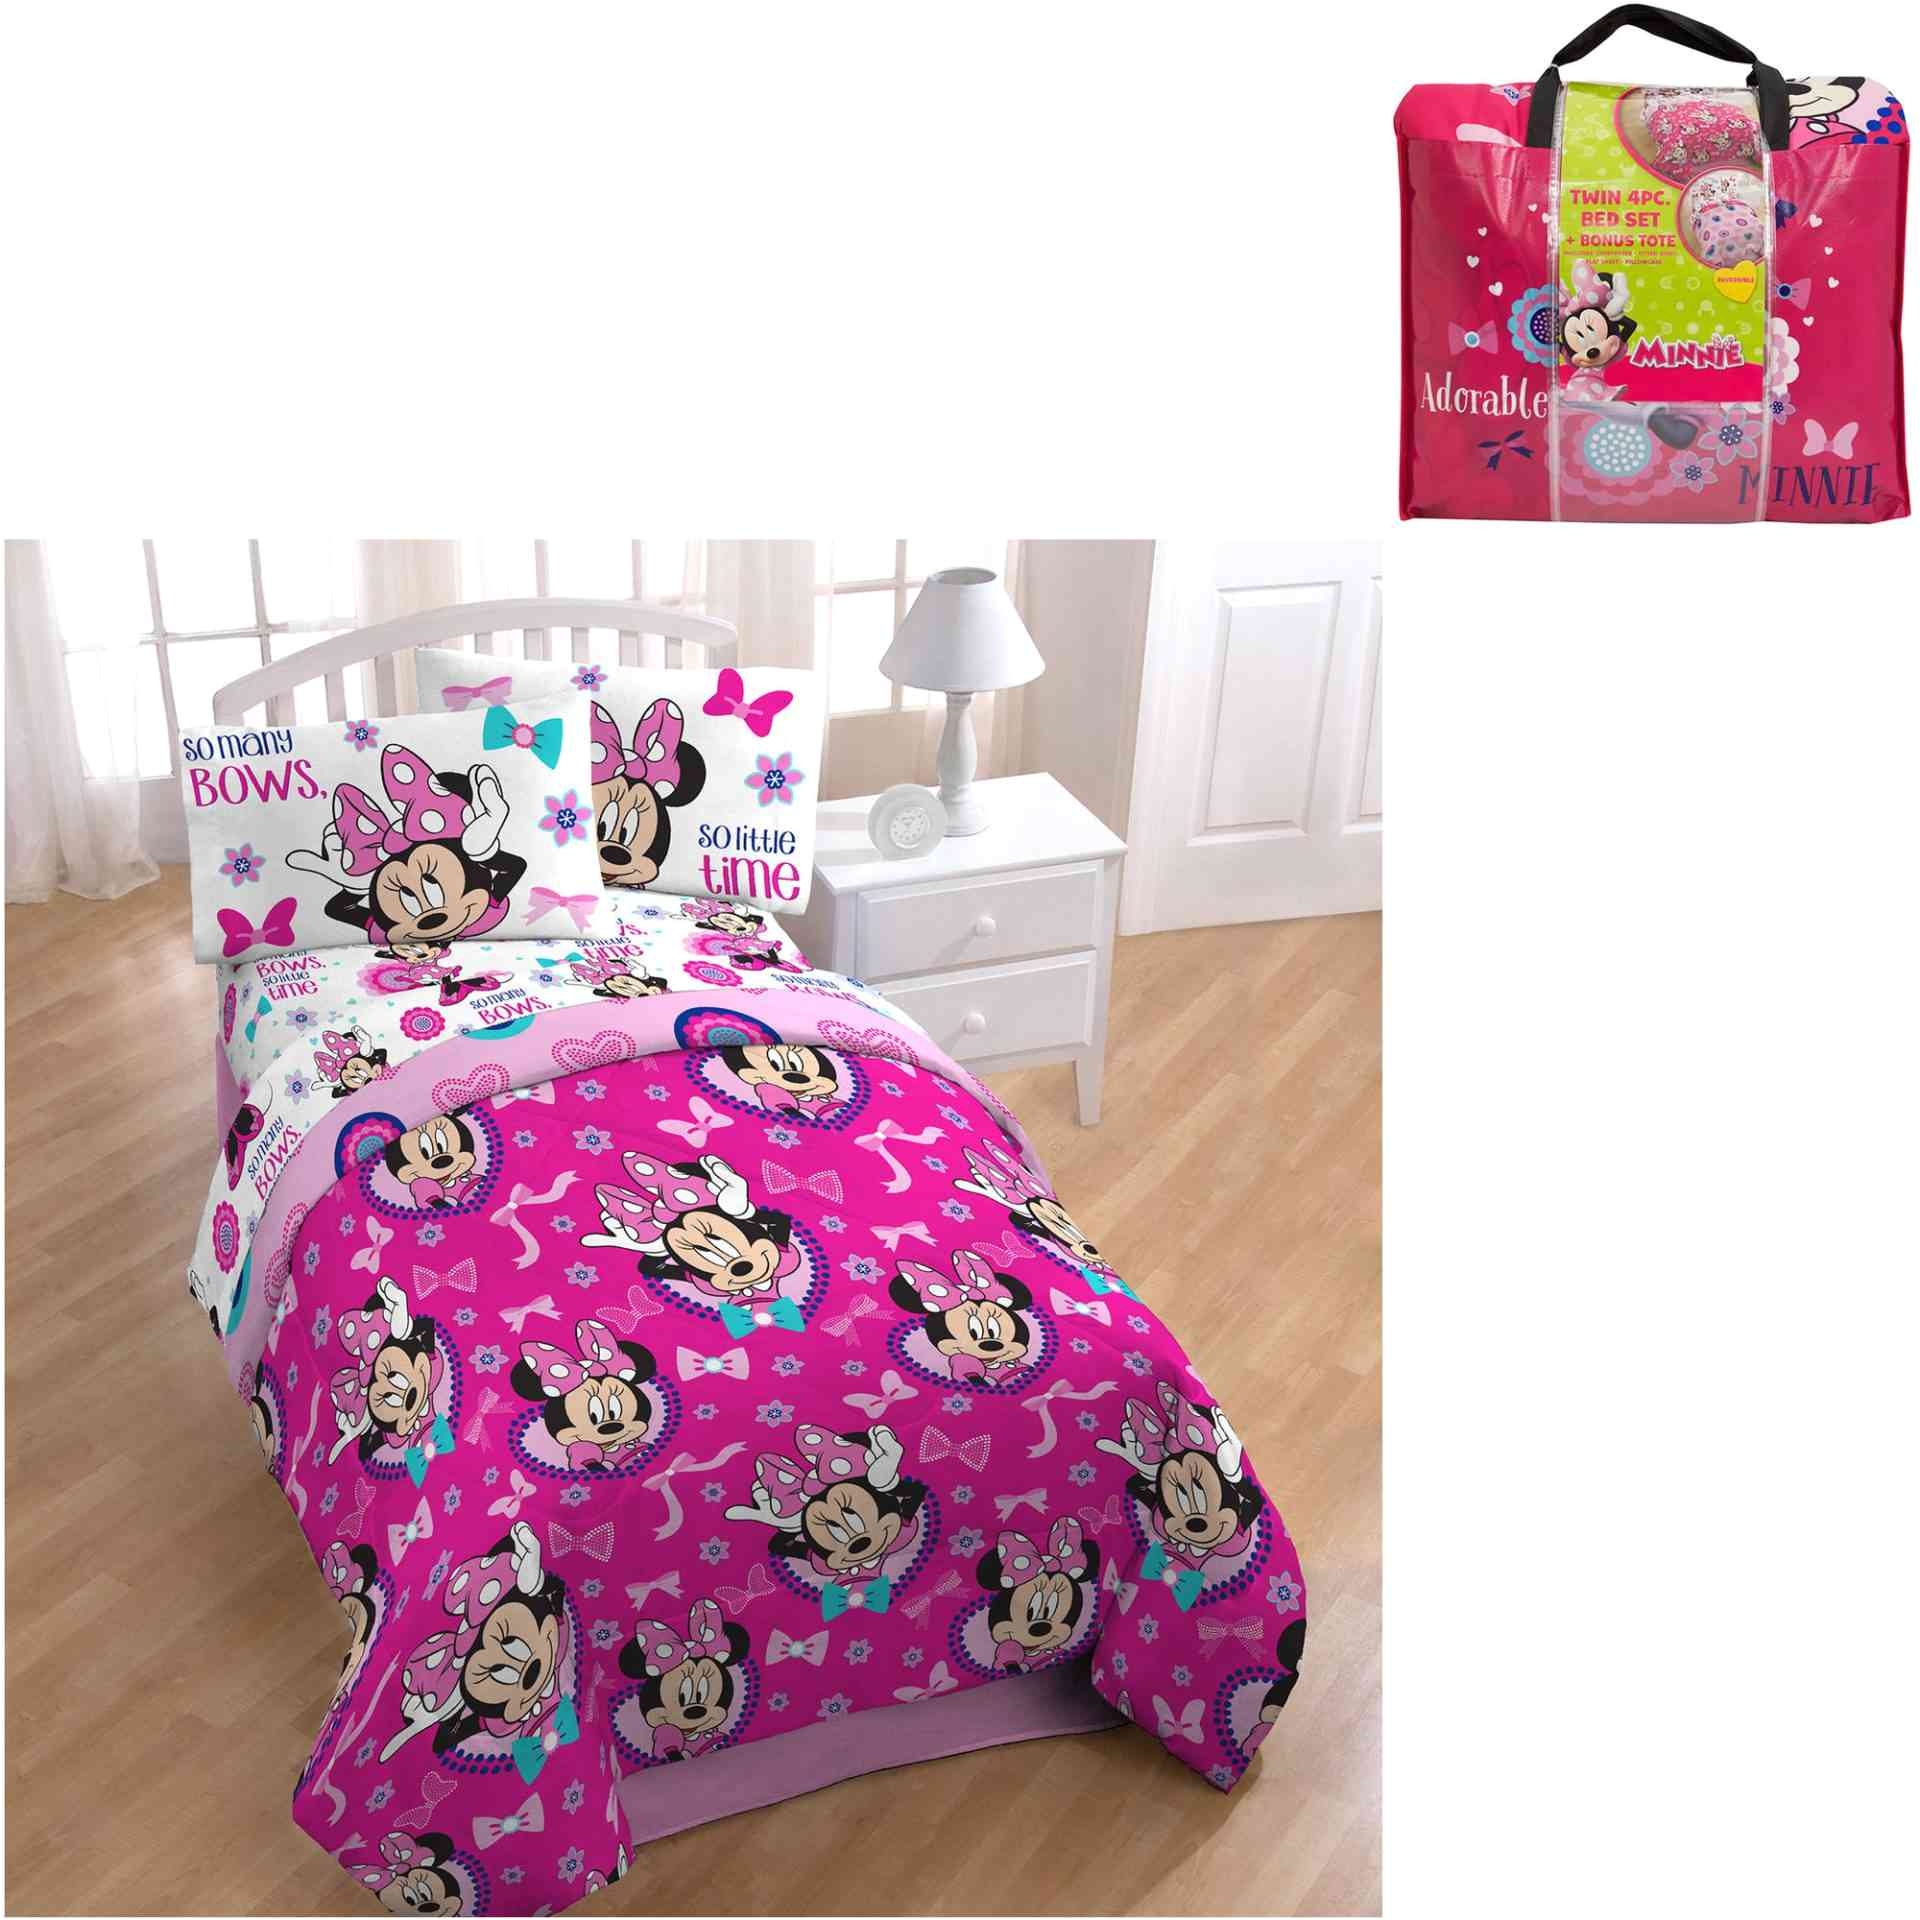 disney minnie mouse twin bedding set forter full size walmart for pink twin beds 2018